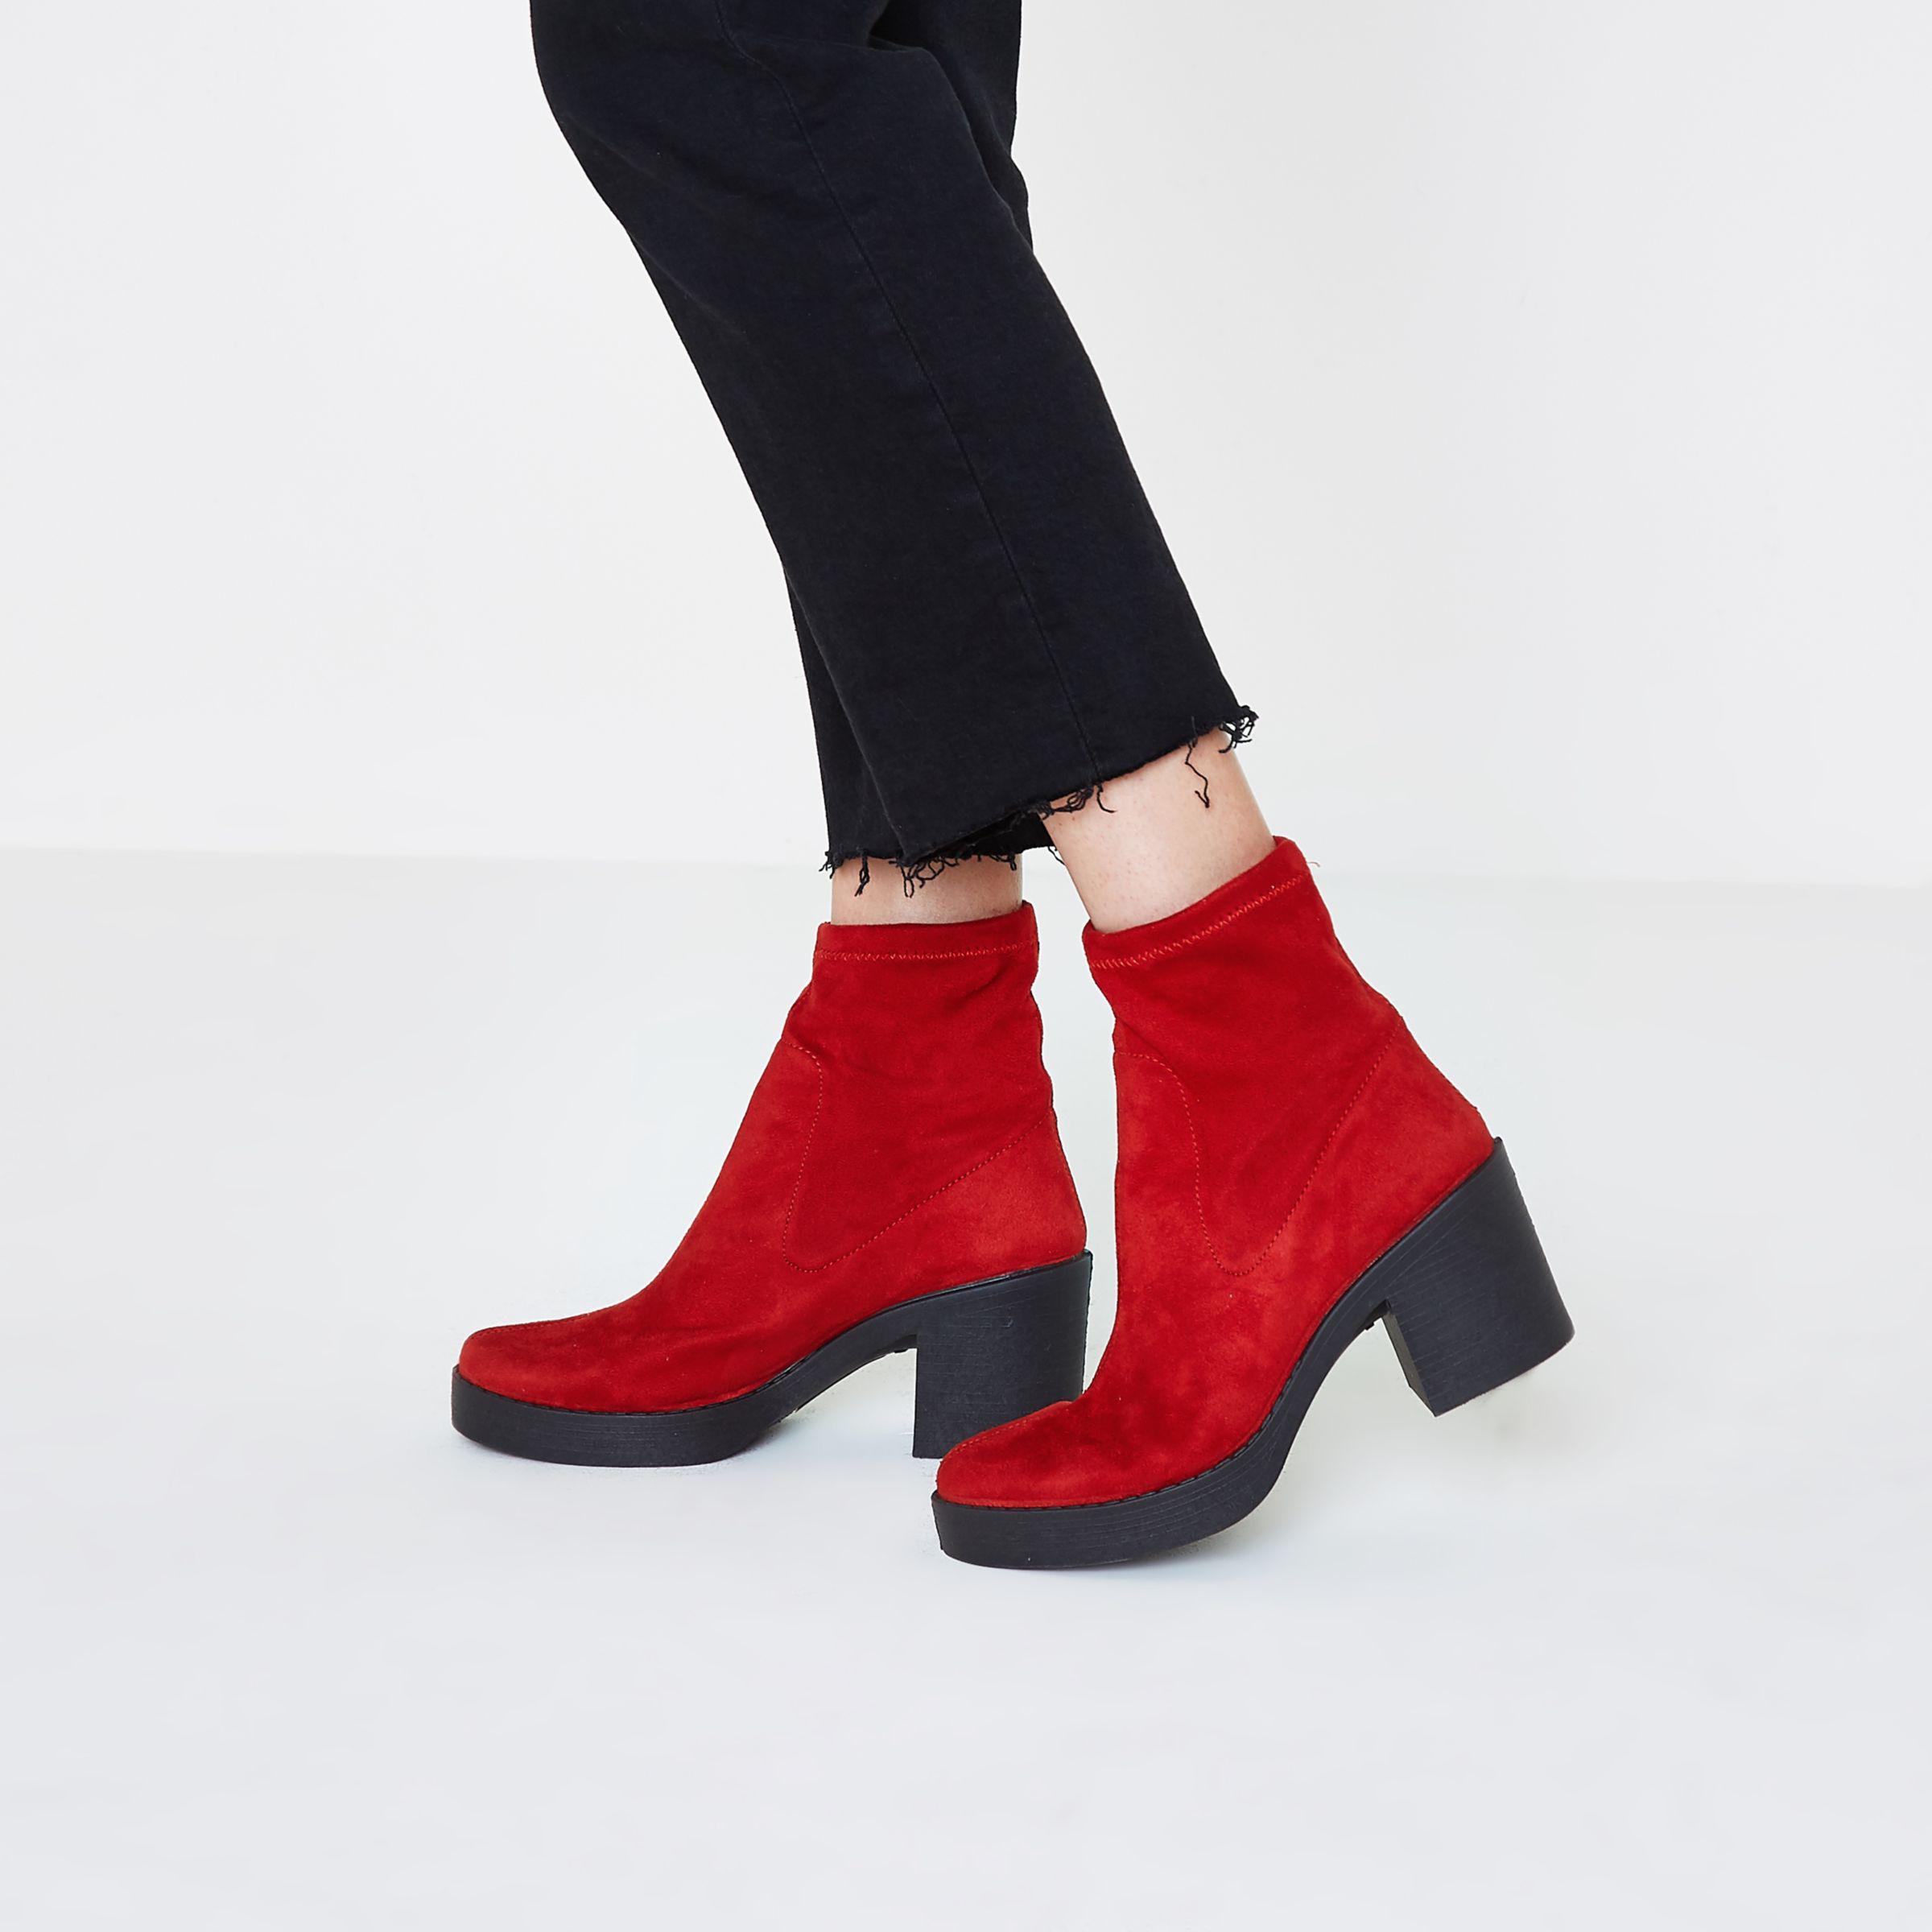 River Island Suede Red Chunky Block Heel Sock Boots - Lyst